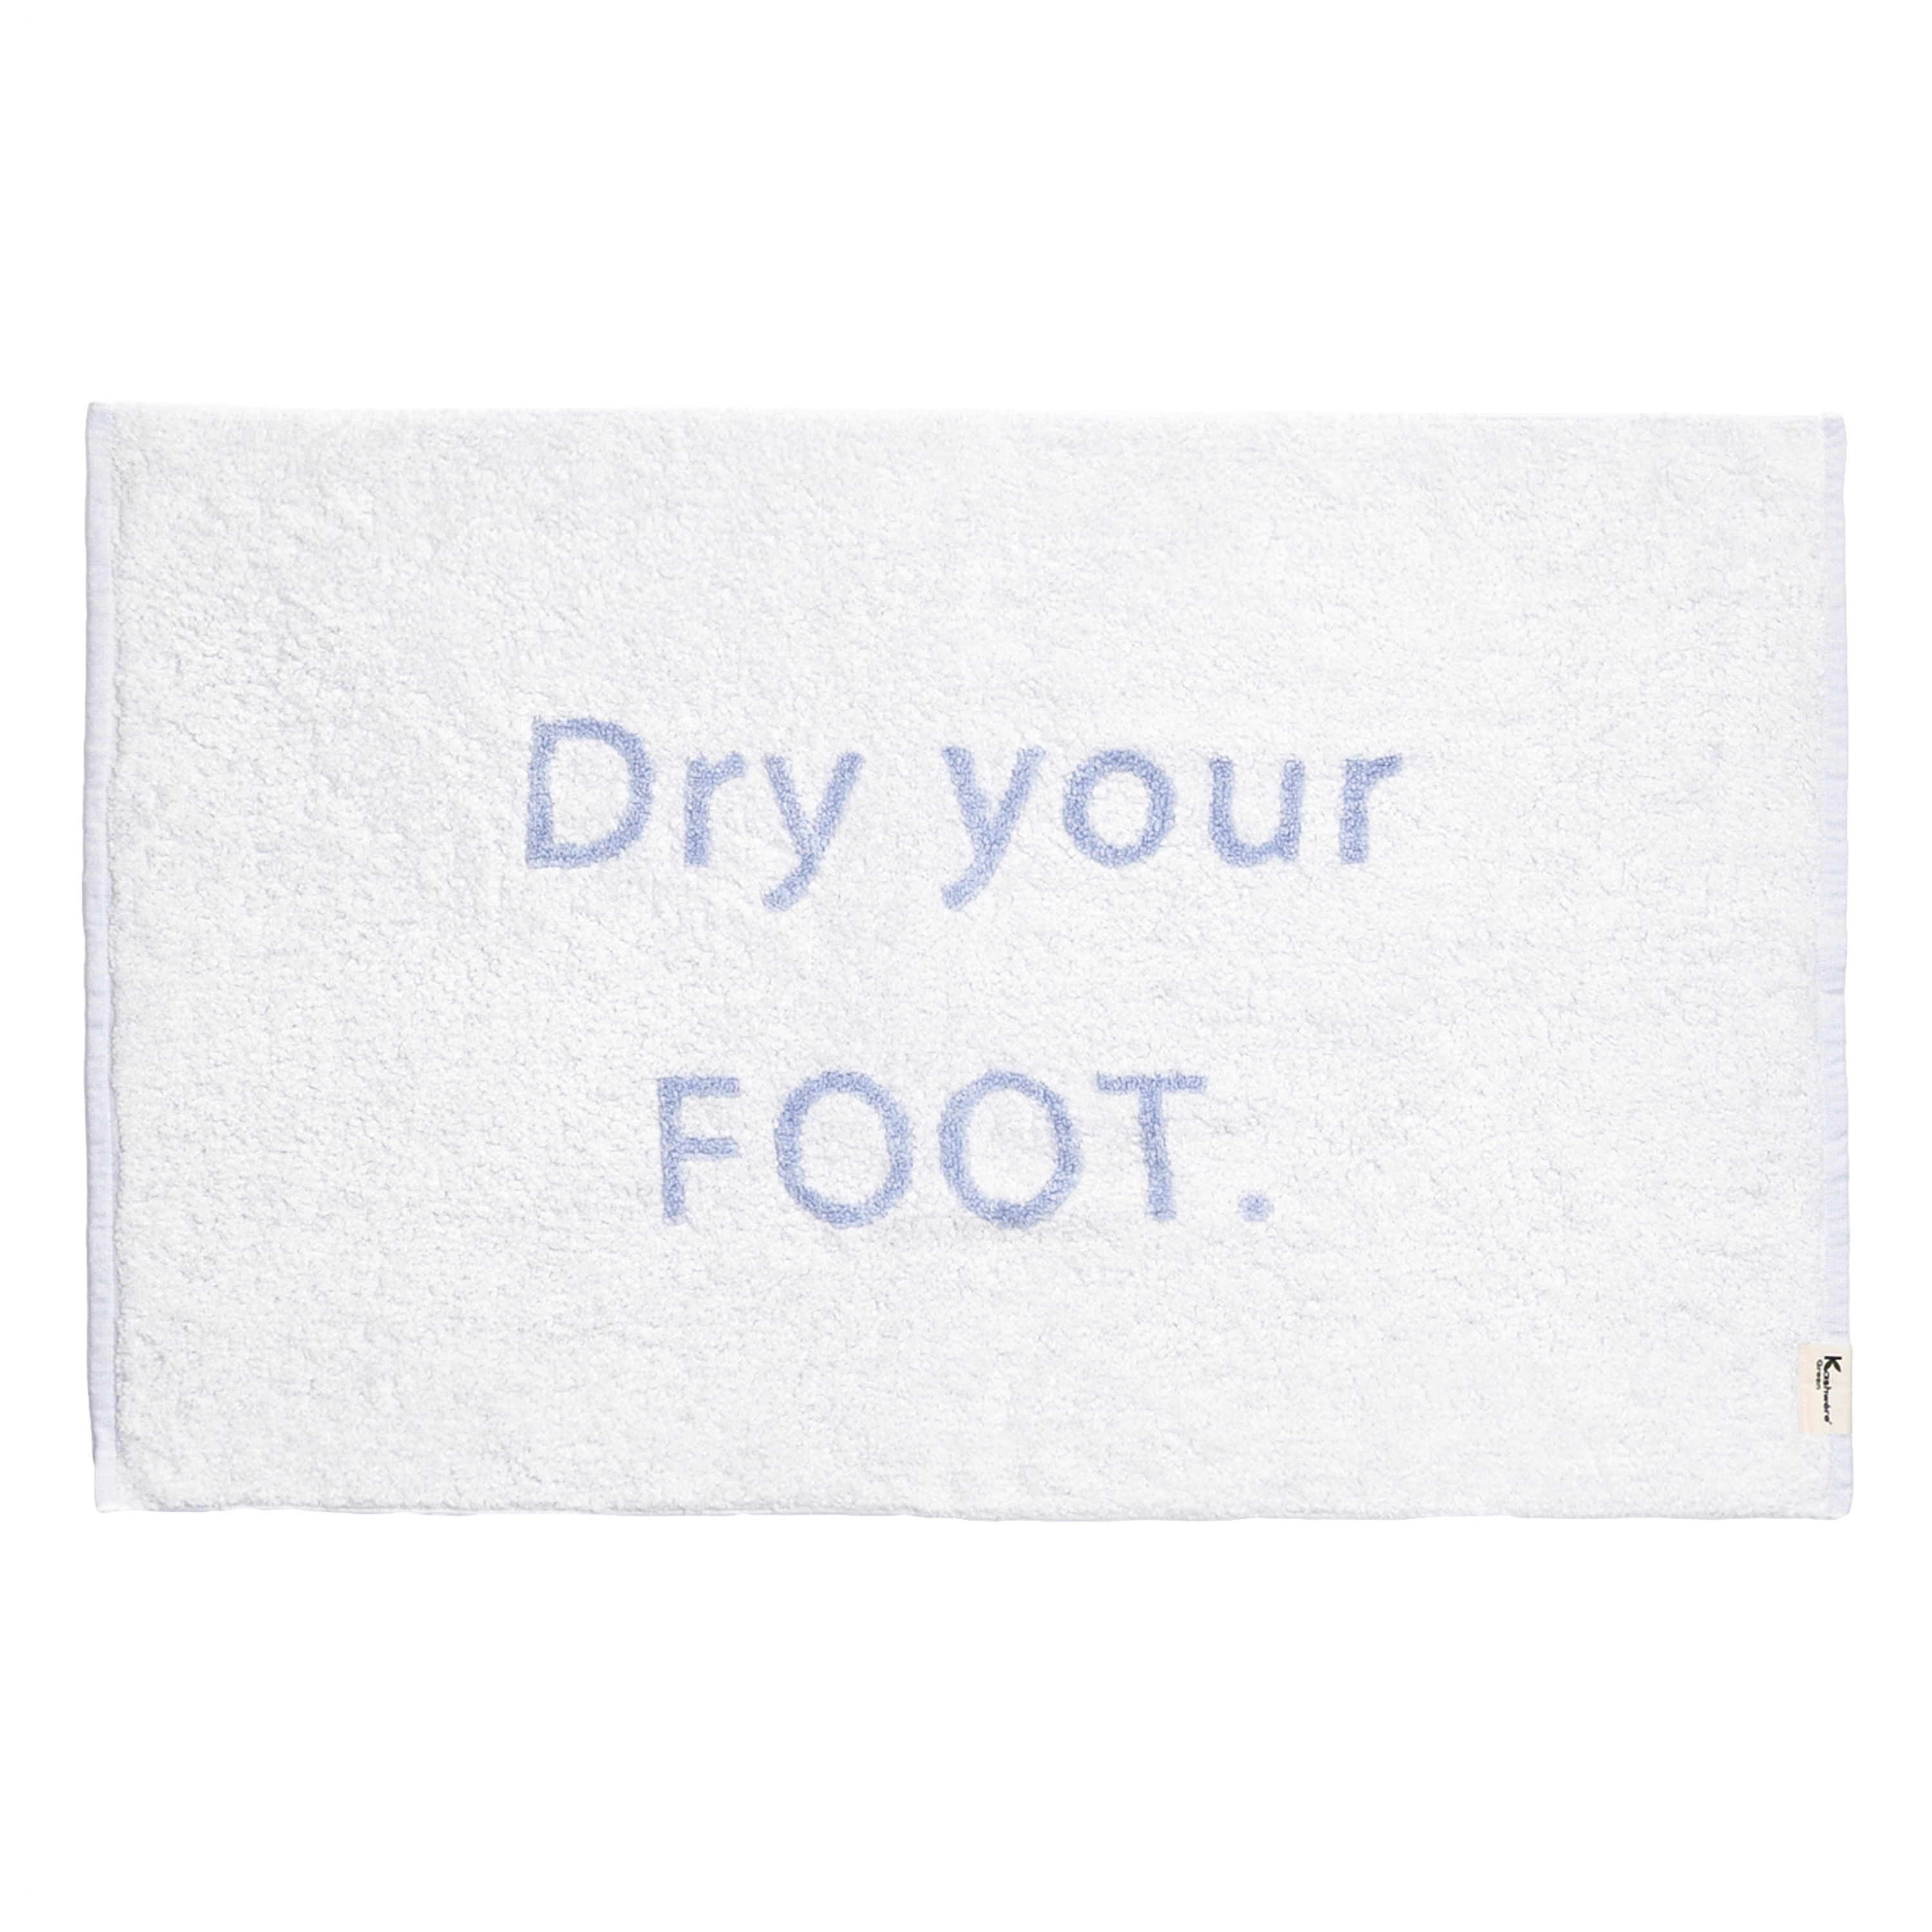 BATH MAT / DRY YOUR FOOT